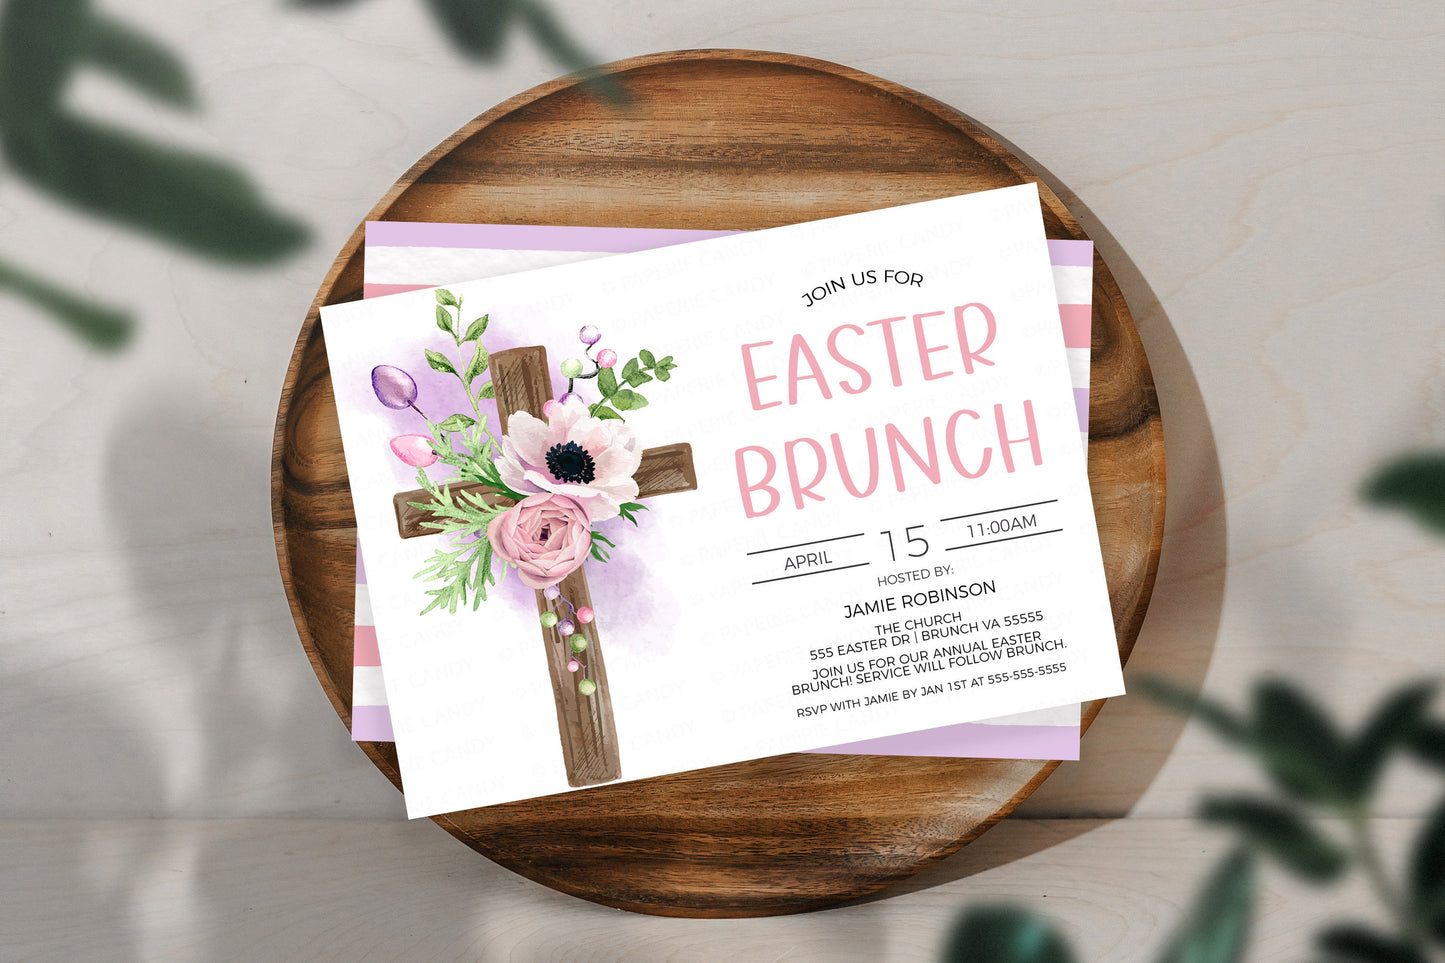 Easter Brunch Invitation, Easter Breakfast Lunch Invite , Easter Dinner Party, Church Service, Employee Appreciation, Editable Printable